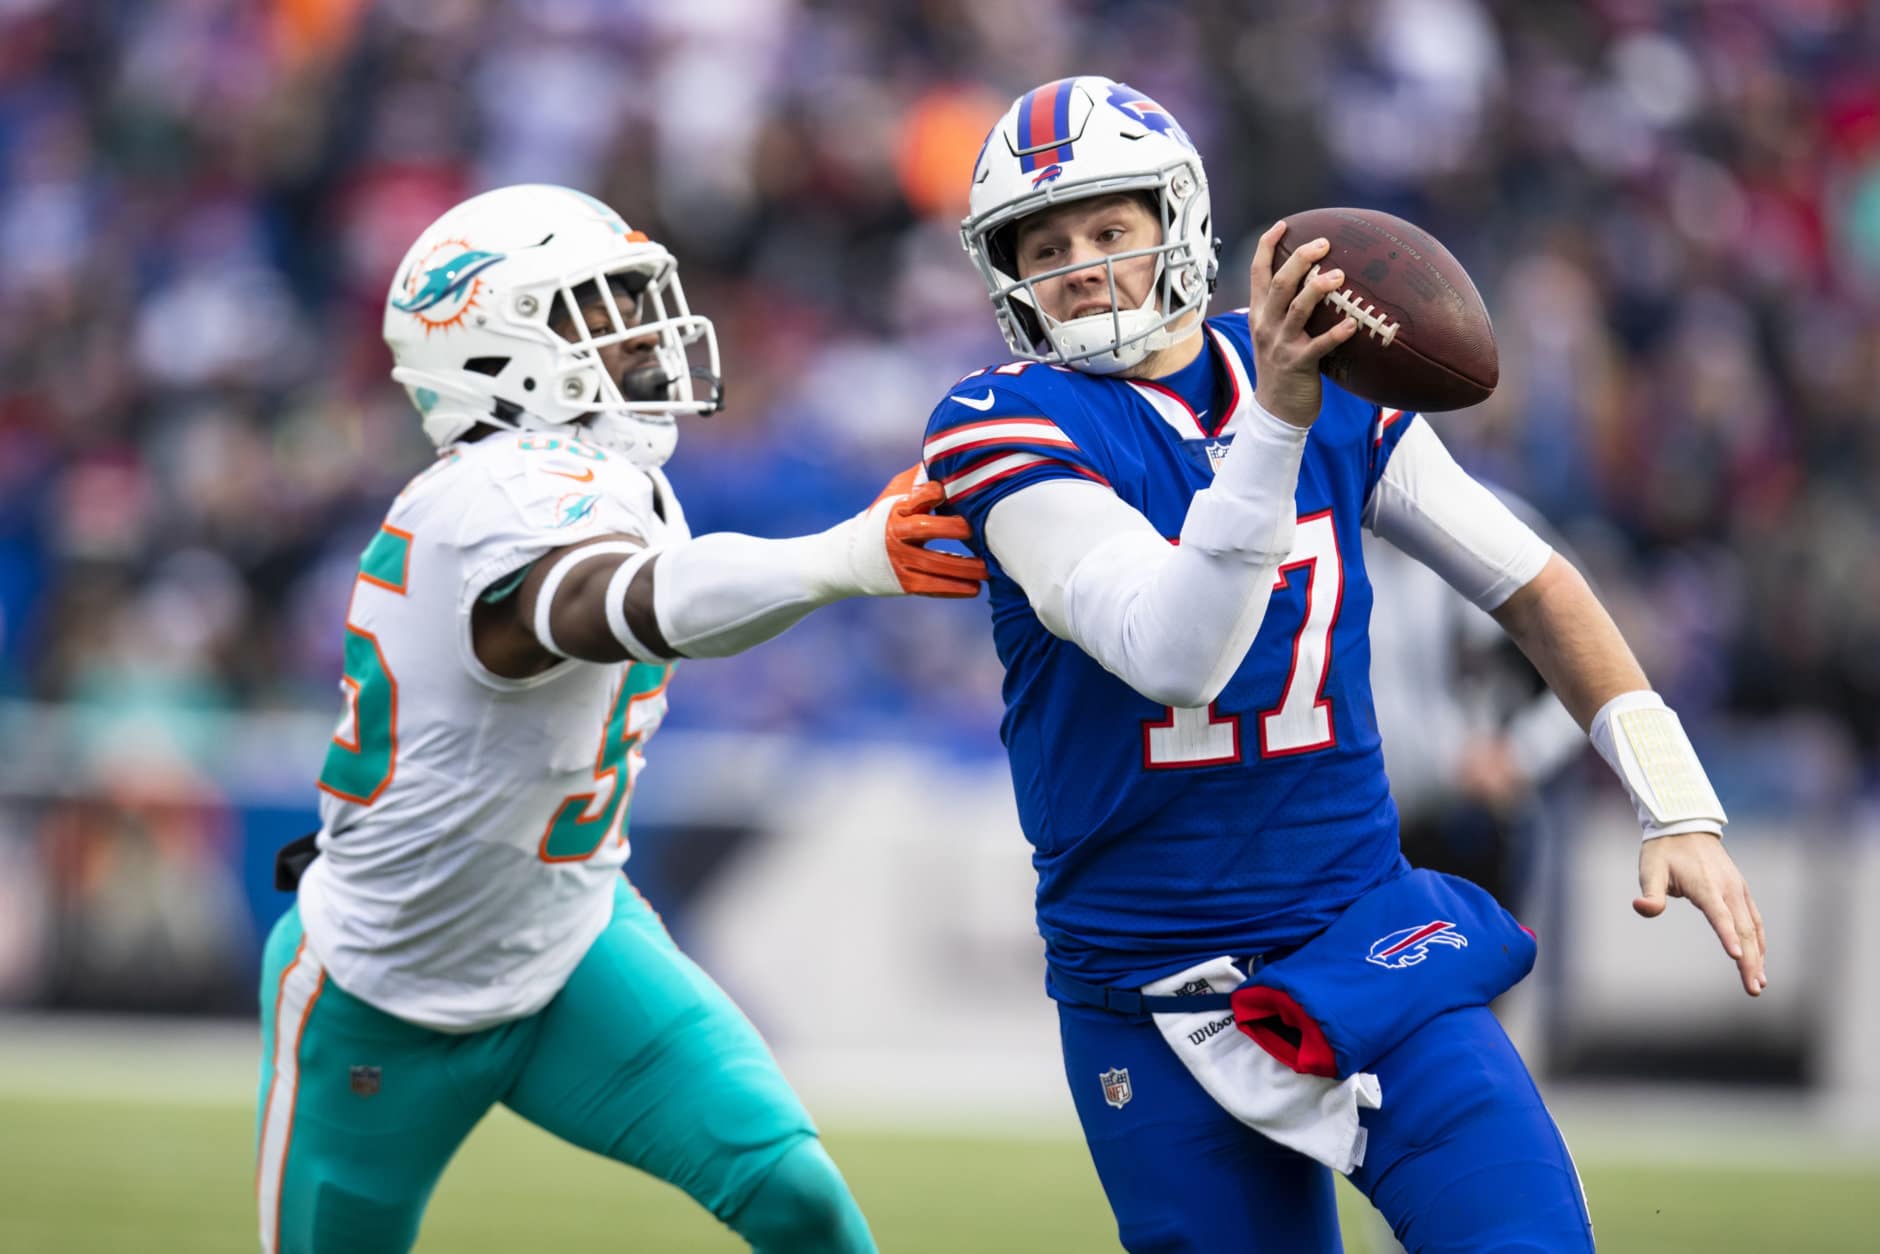 ORCHARD PARK, NY - DECEMBER 30:  Josh Allen #17 of the Buffalo Bills runs with the ball as he tries to avoid Jerome Baker #55 of the Miami Dolphins during the third quarter at New Era Field on December 30, 2018 in Orchard Park, New York. Buffalo defeats Miami 42-17. (Photo by Brett Carlsen/Getty Images)